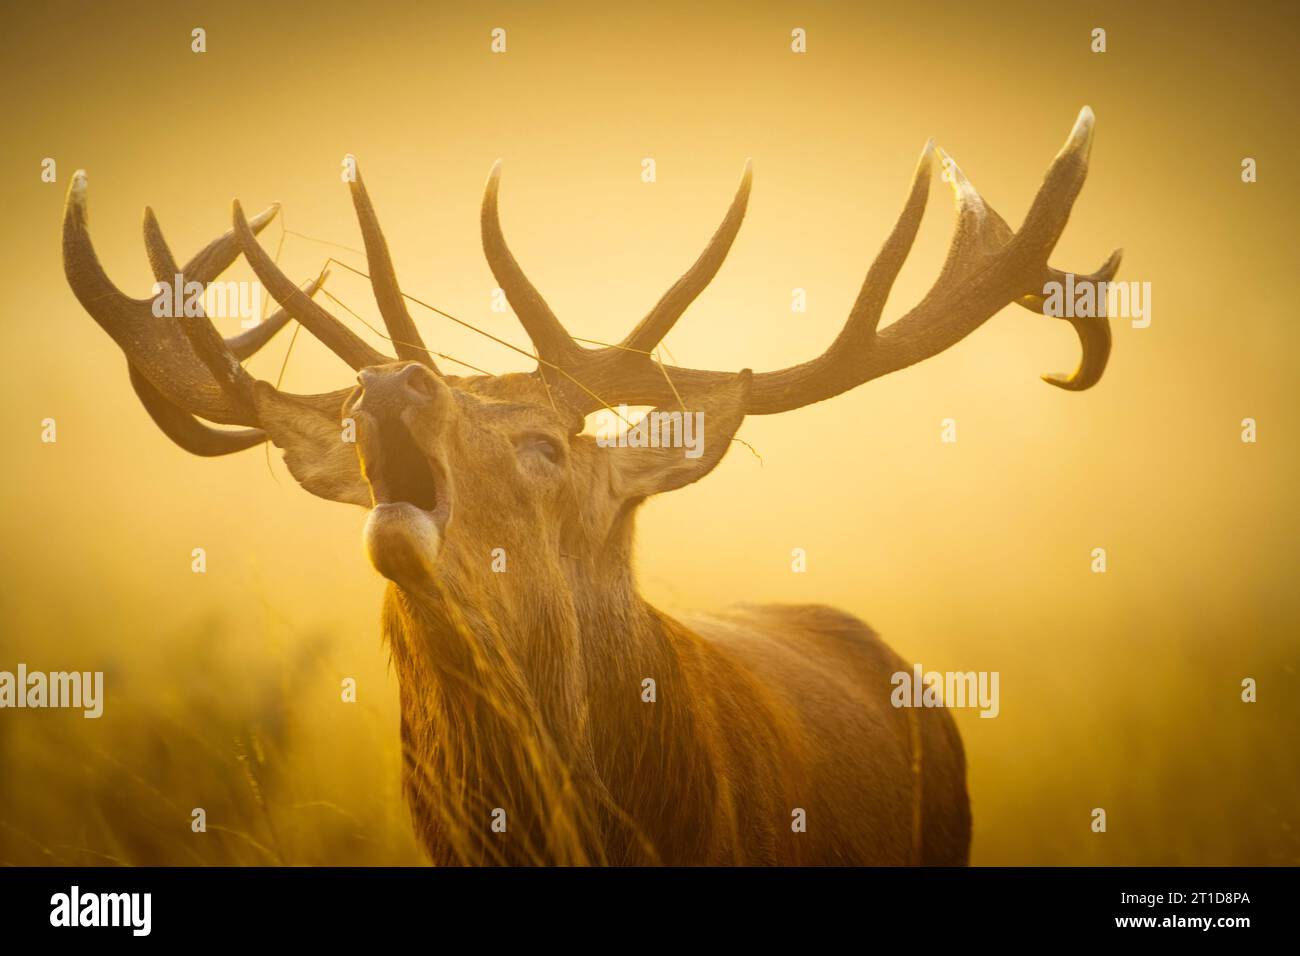 The stag bellows for a female LONDON, ENGLAND STRIKING IMAGES of a stag bellowing in the golden hour light on October 8th have been captured.  Images Stock Photo